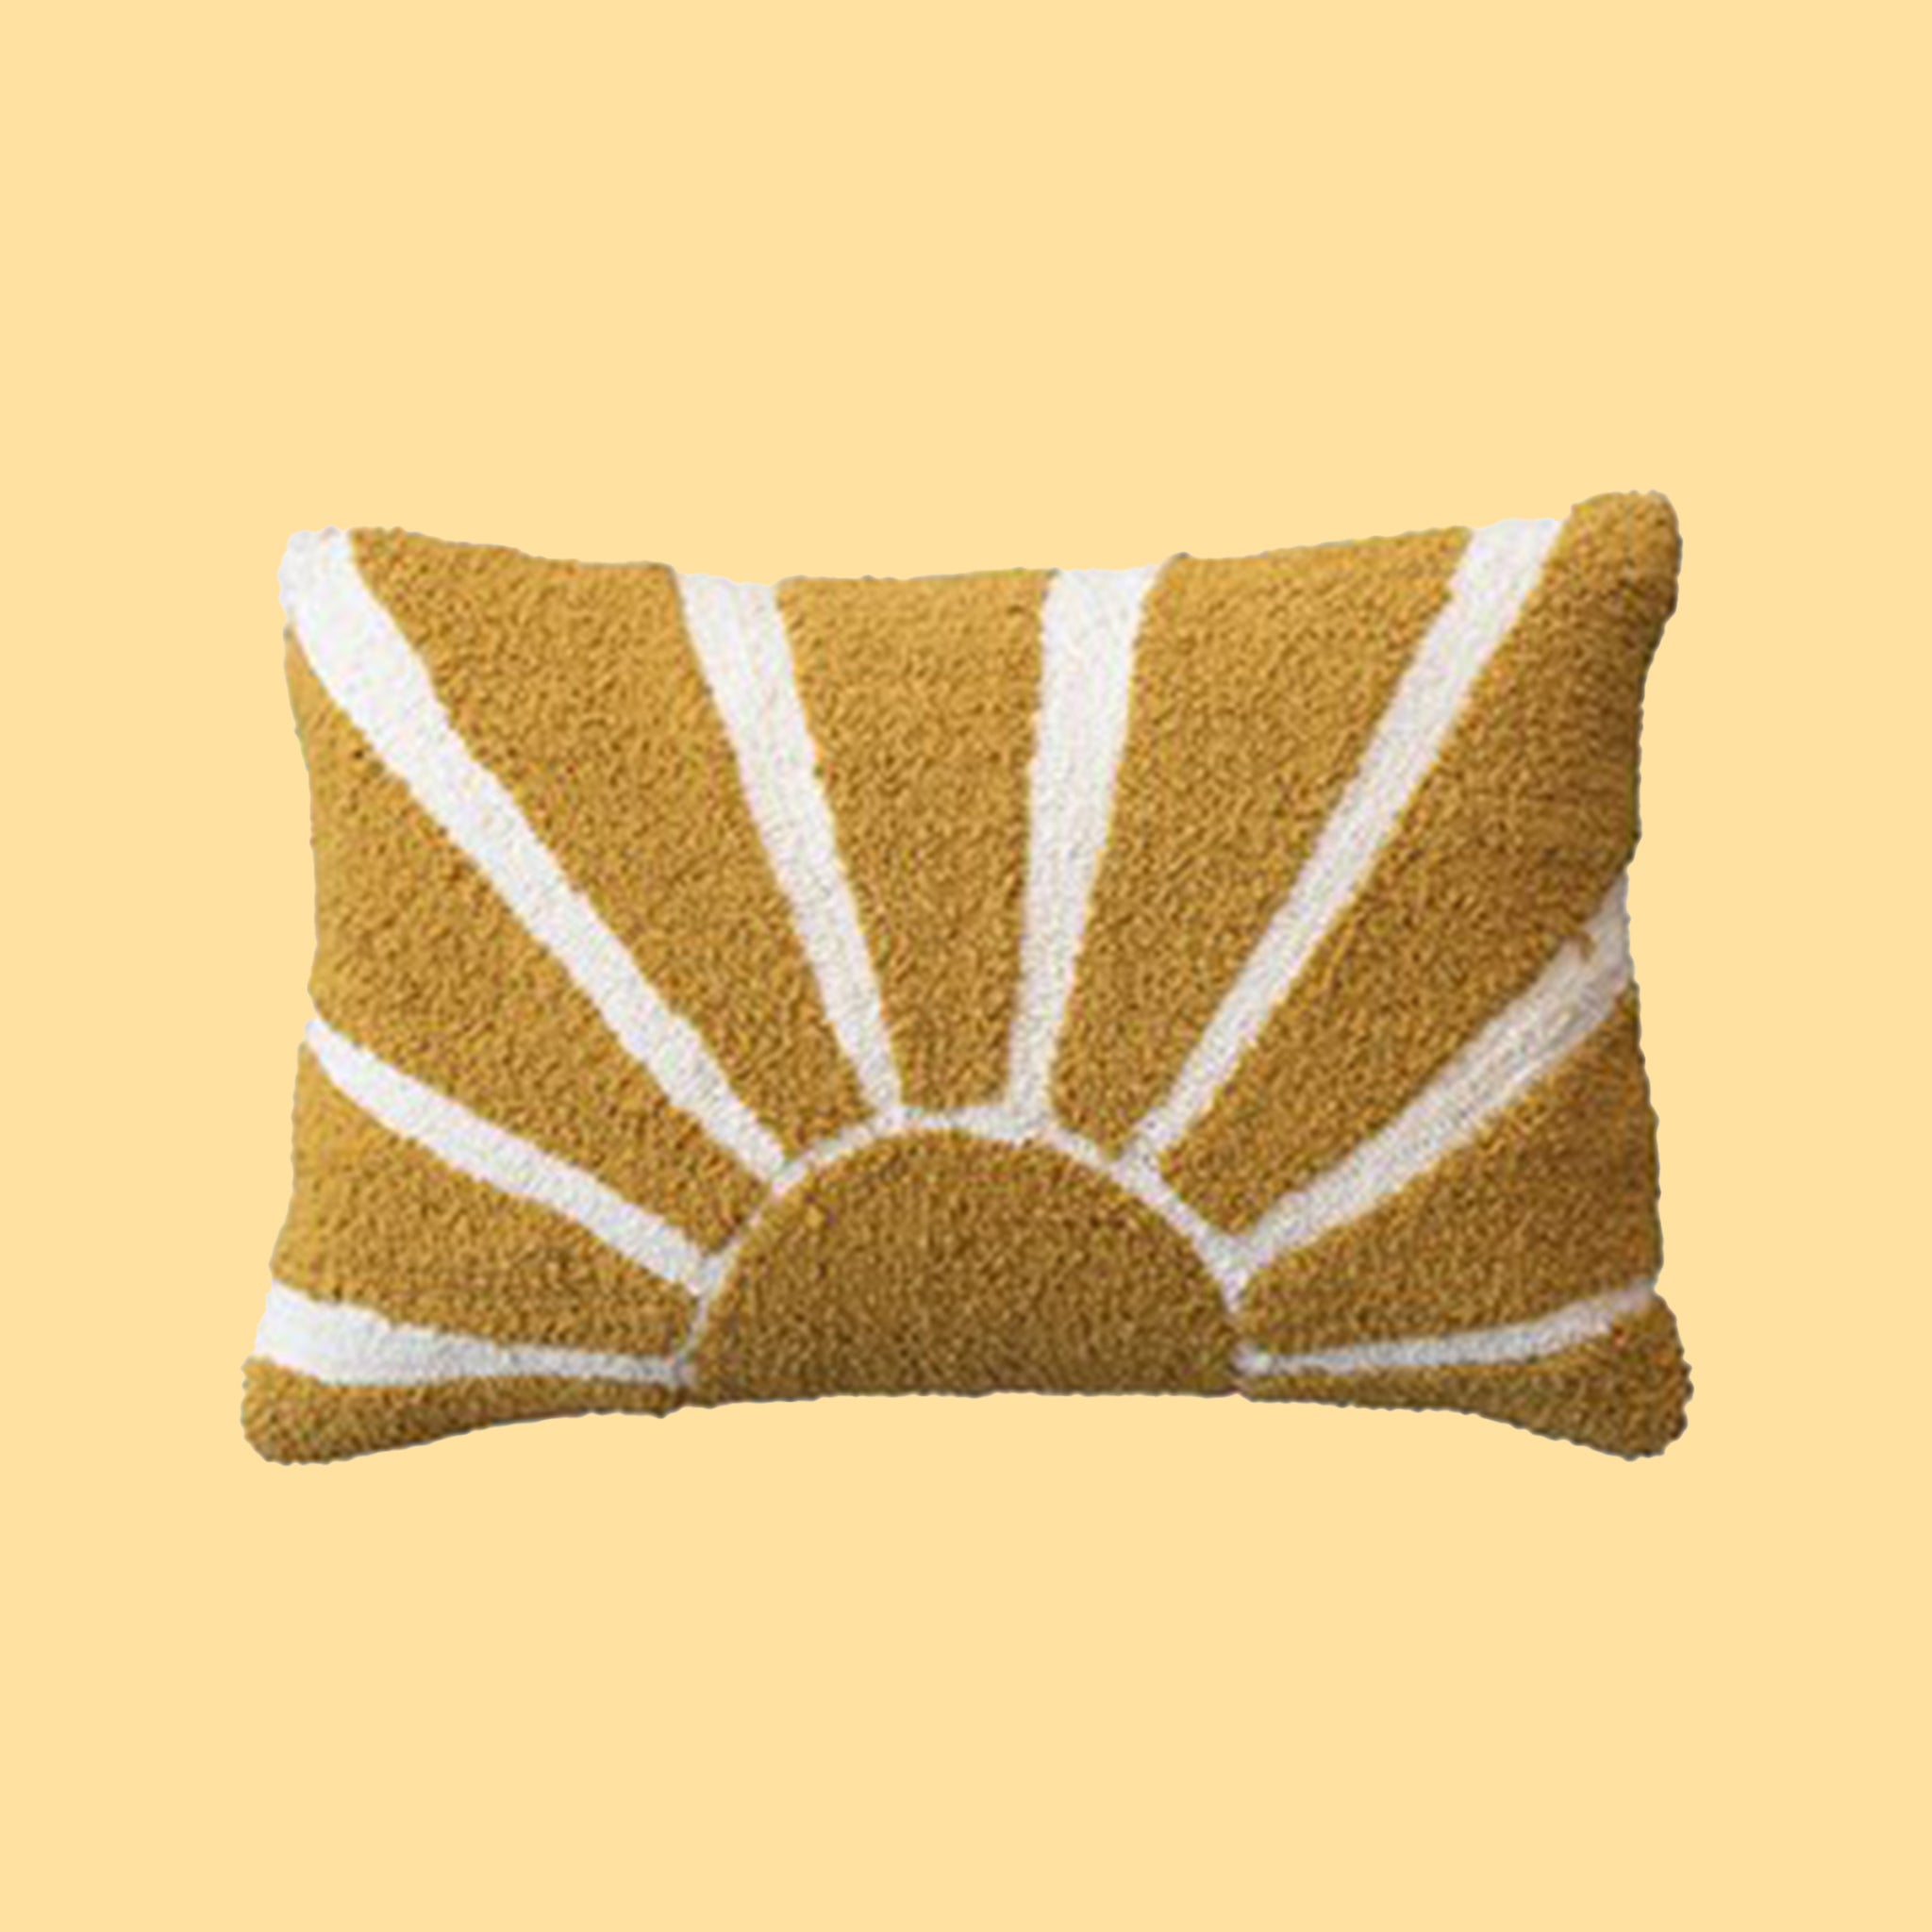 On a yellow background is a yellow and cream lumbar pillow with a sunshine design.